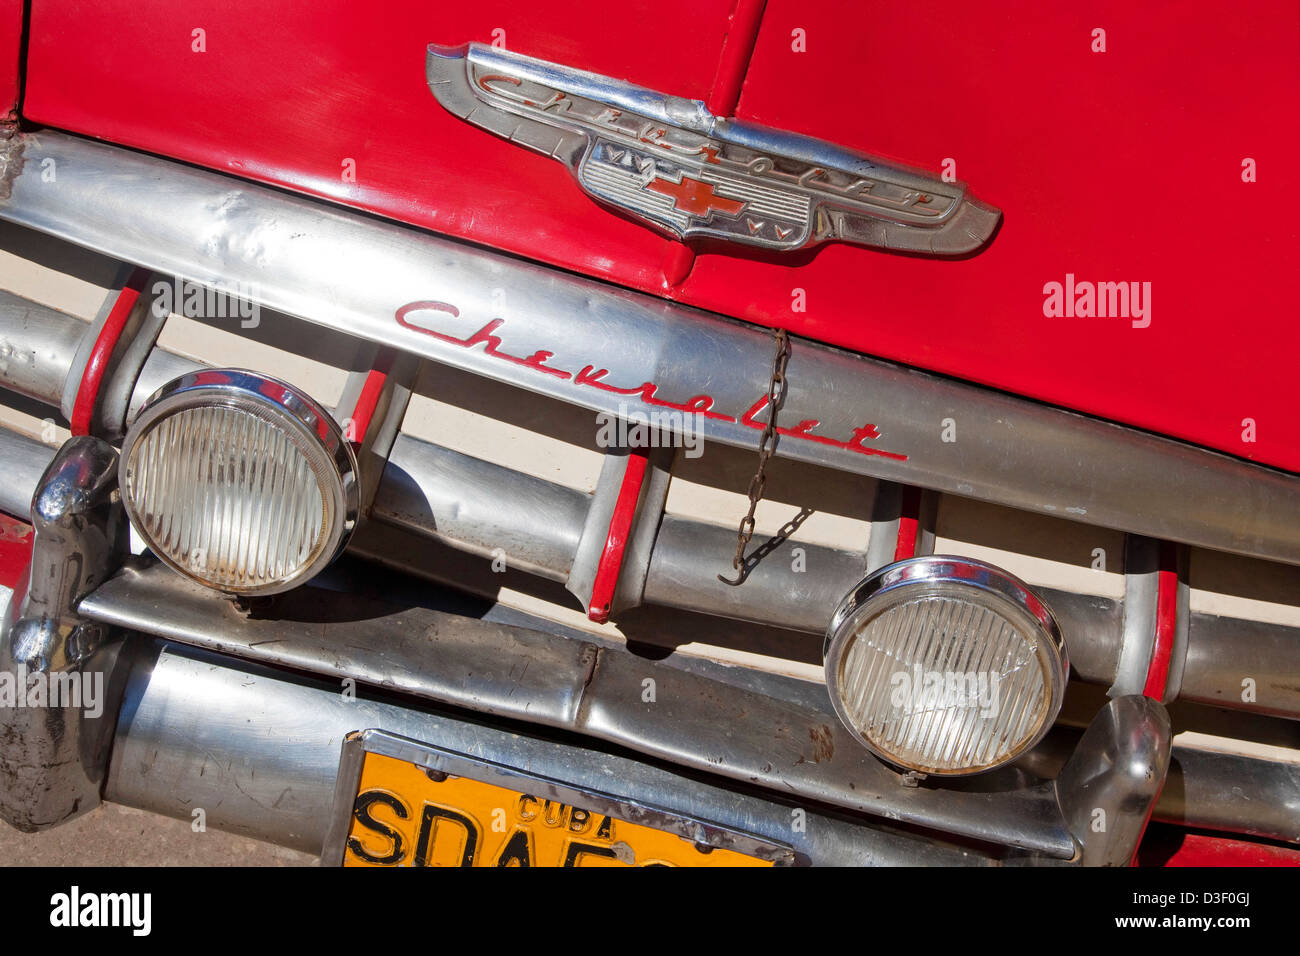 Close up of logo, bumper and grille of red old 1950s vintage American Chevrolet car / Yank tank in Trinidad, Cuba, Caribbean Stock Photo